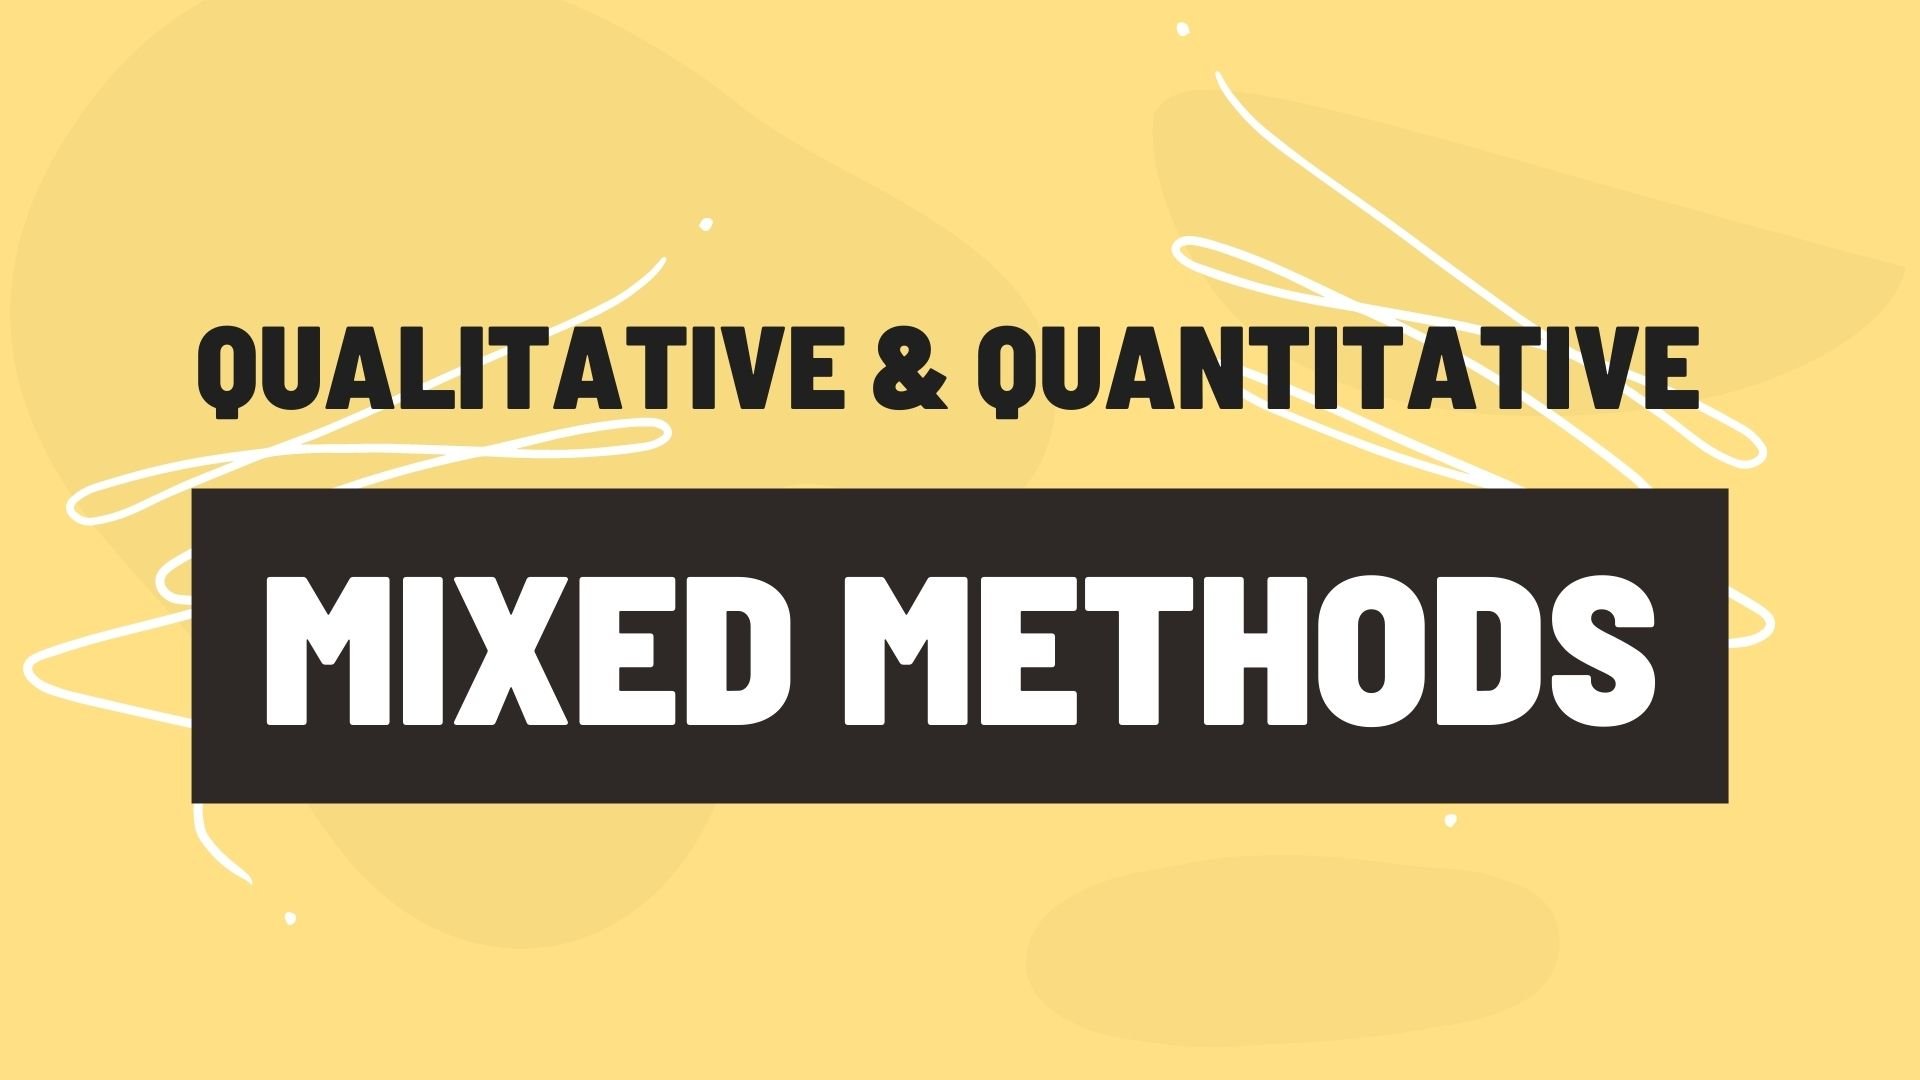 Data Analysis in Research: Types & Methods